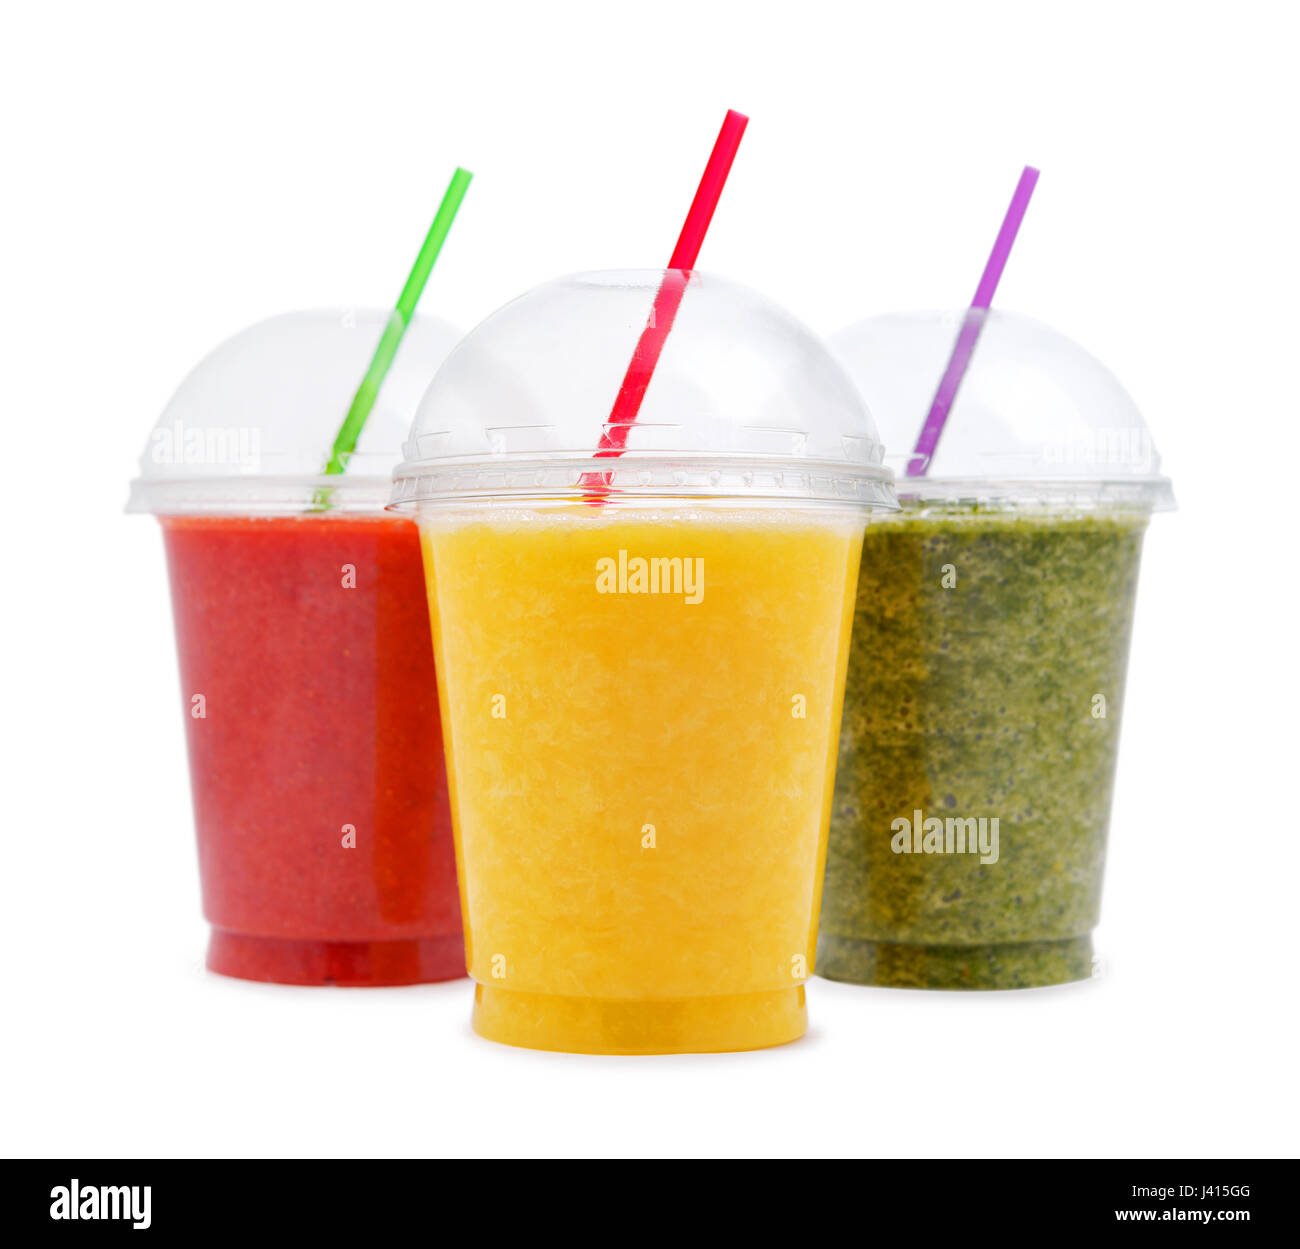 Download Green Orange And Red Smoothie In Plastic Transparent Cups Isolated Stock Photo Alamy Yellowimages Mockups